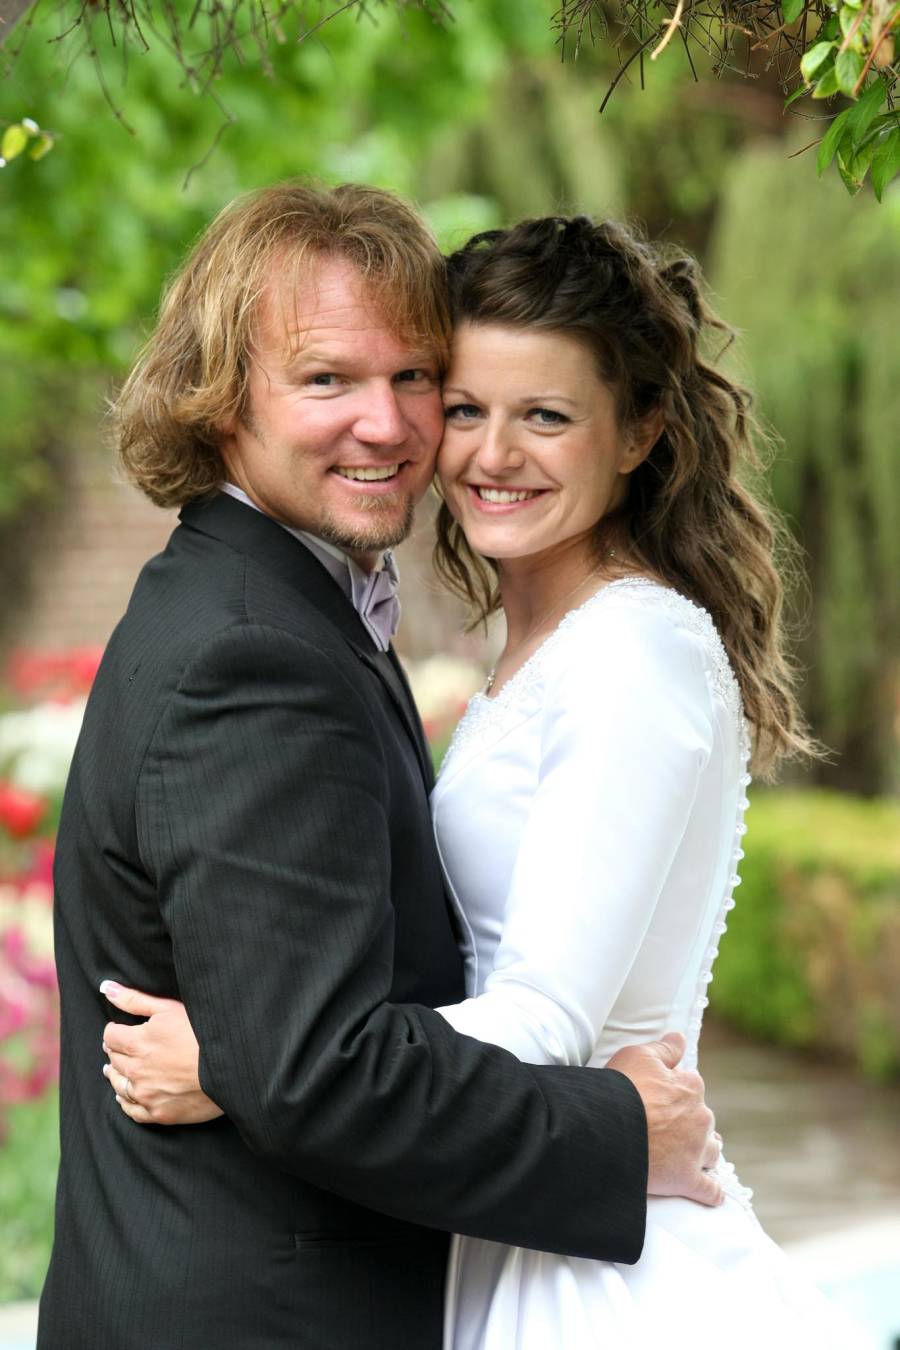 Everything We Know About 'Sister Wives' Season 17 Following Divorce Drama